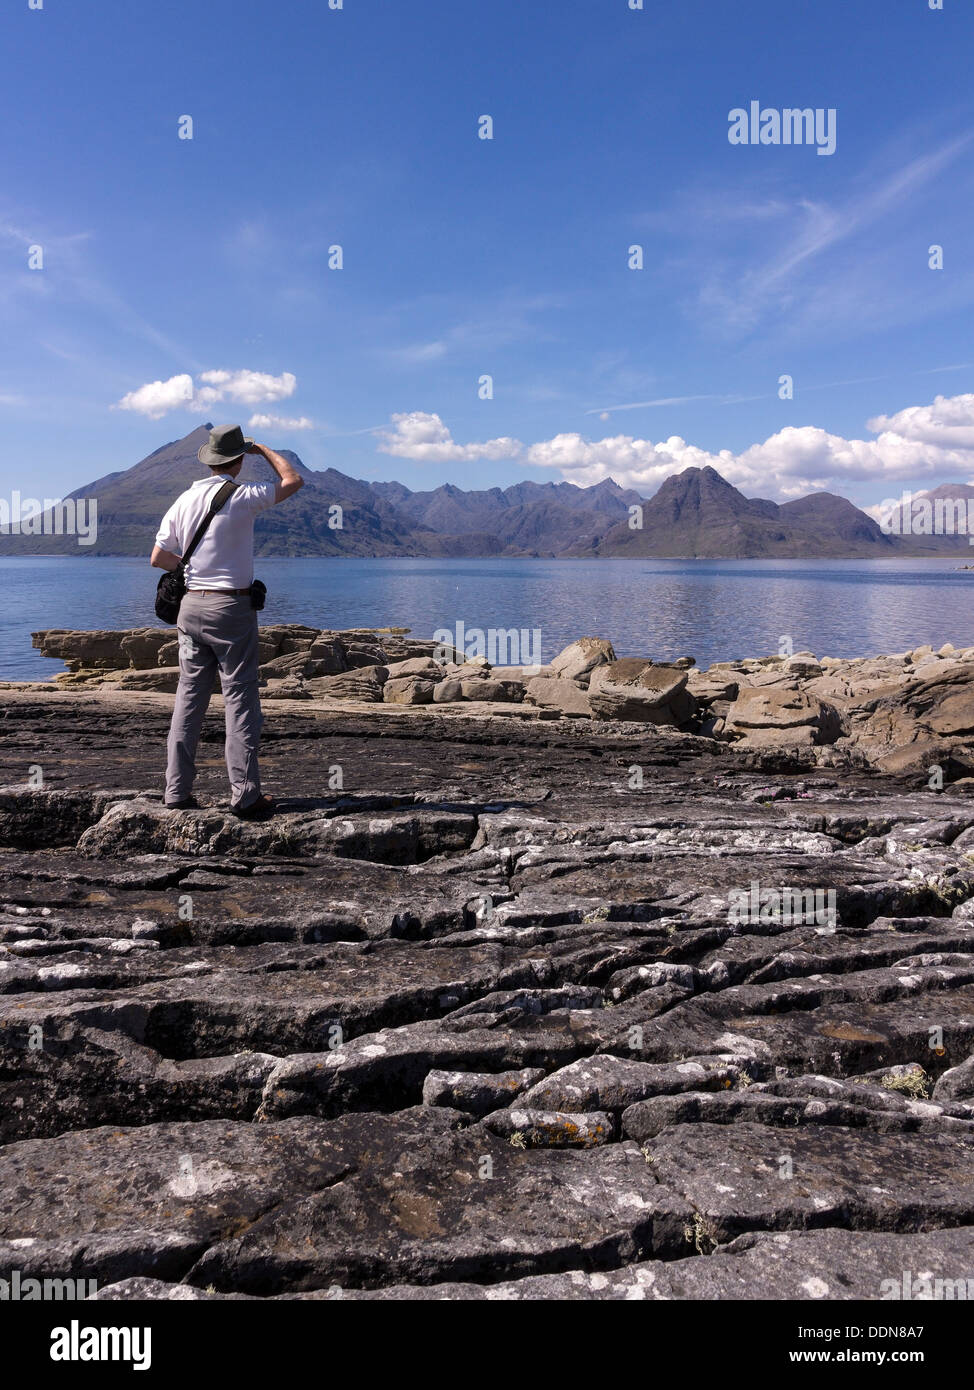 Male holidaymaker admiring view from Elgol over Sea Loch Scavaig to the Black Cuillin mountains, Isle of Skye, Scotland, UK Stock Photo